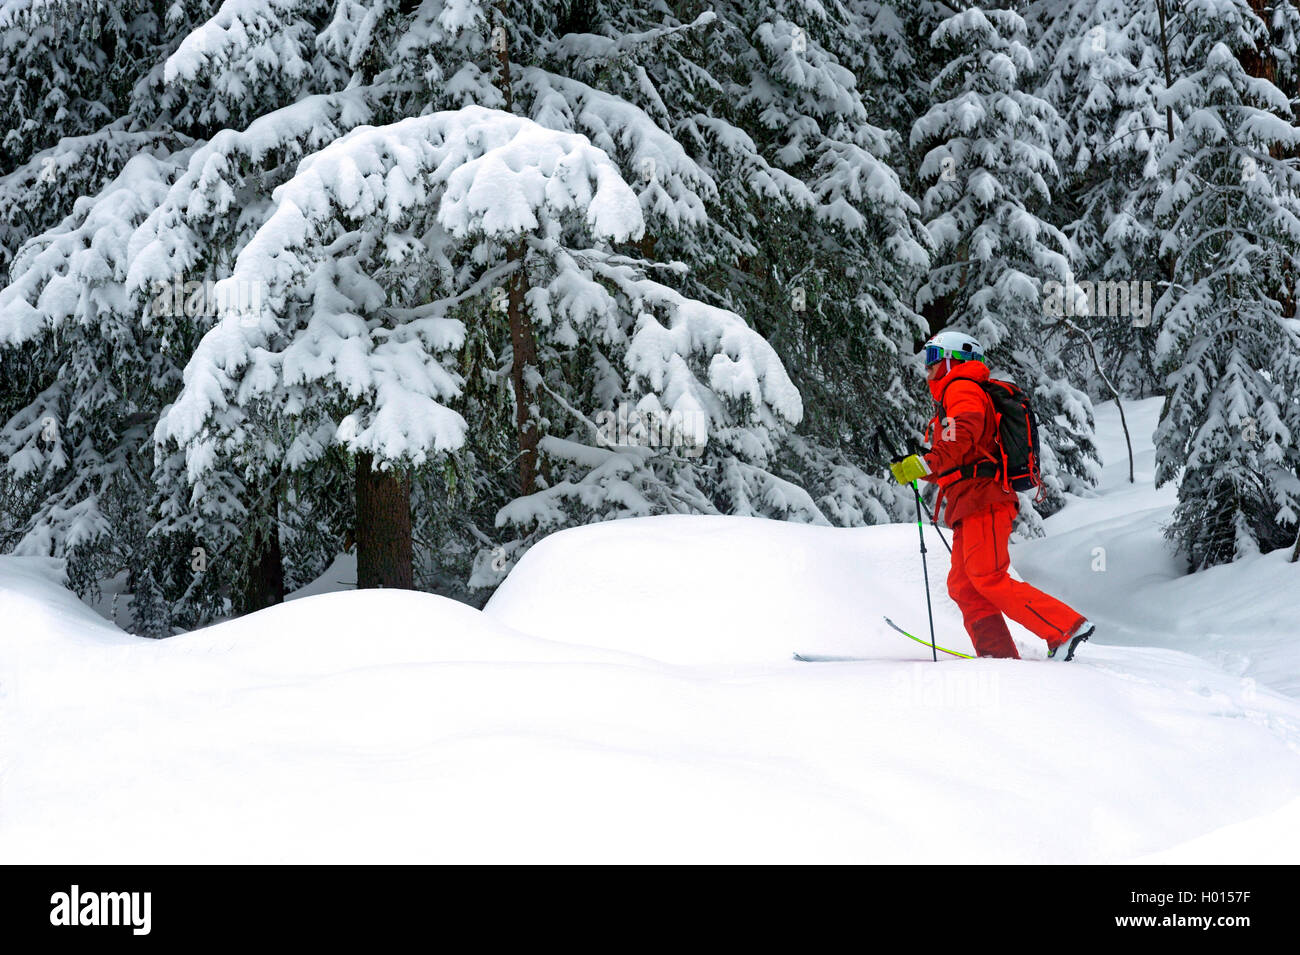 backcountry skiing in front of snowy coniferous forest, France, Savoie, La Plagne Stock Photo